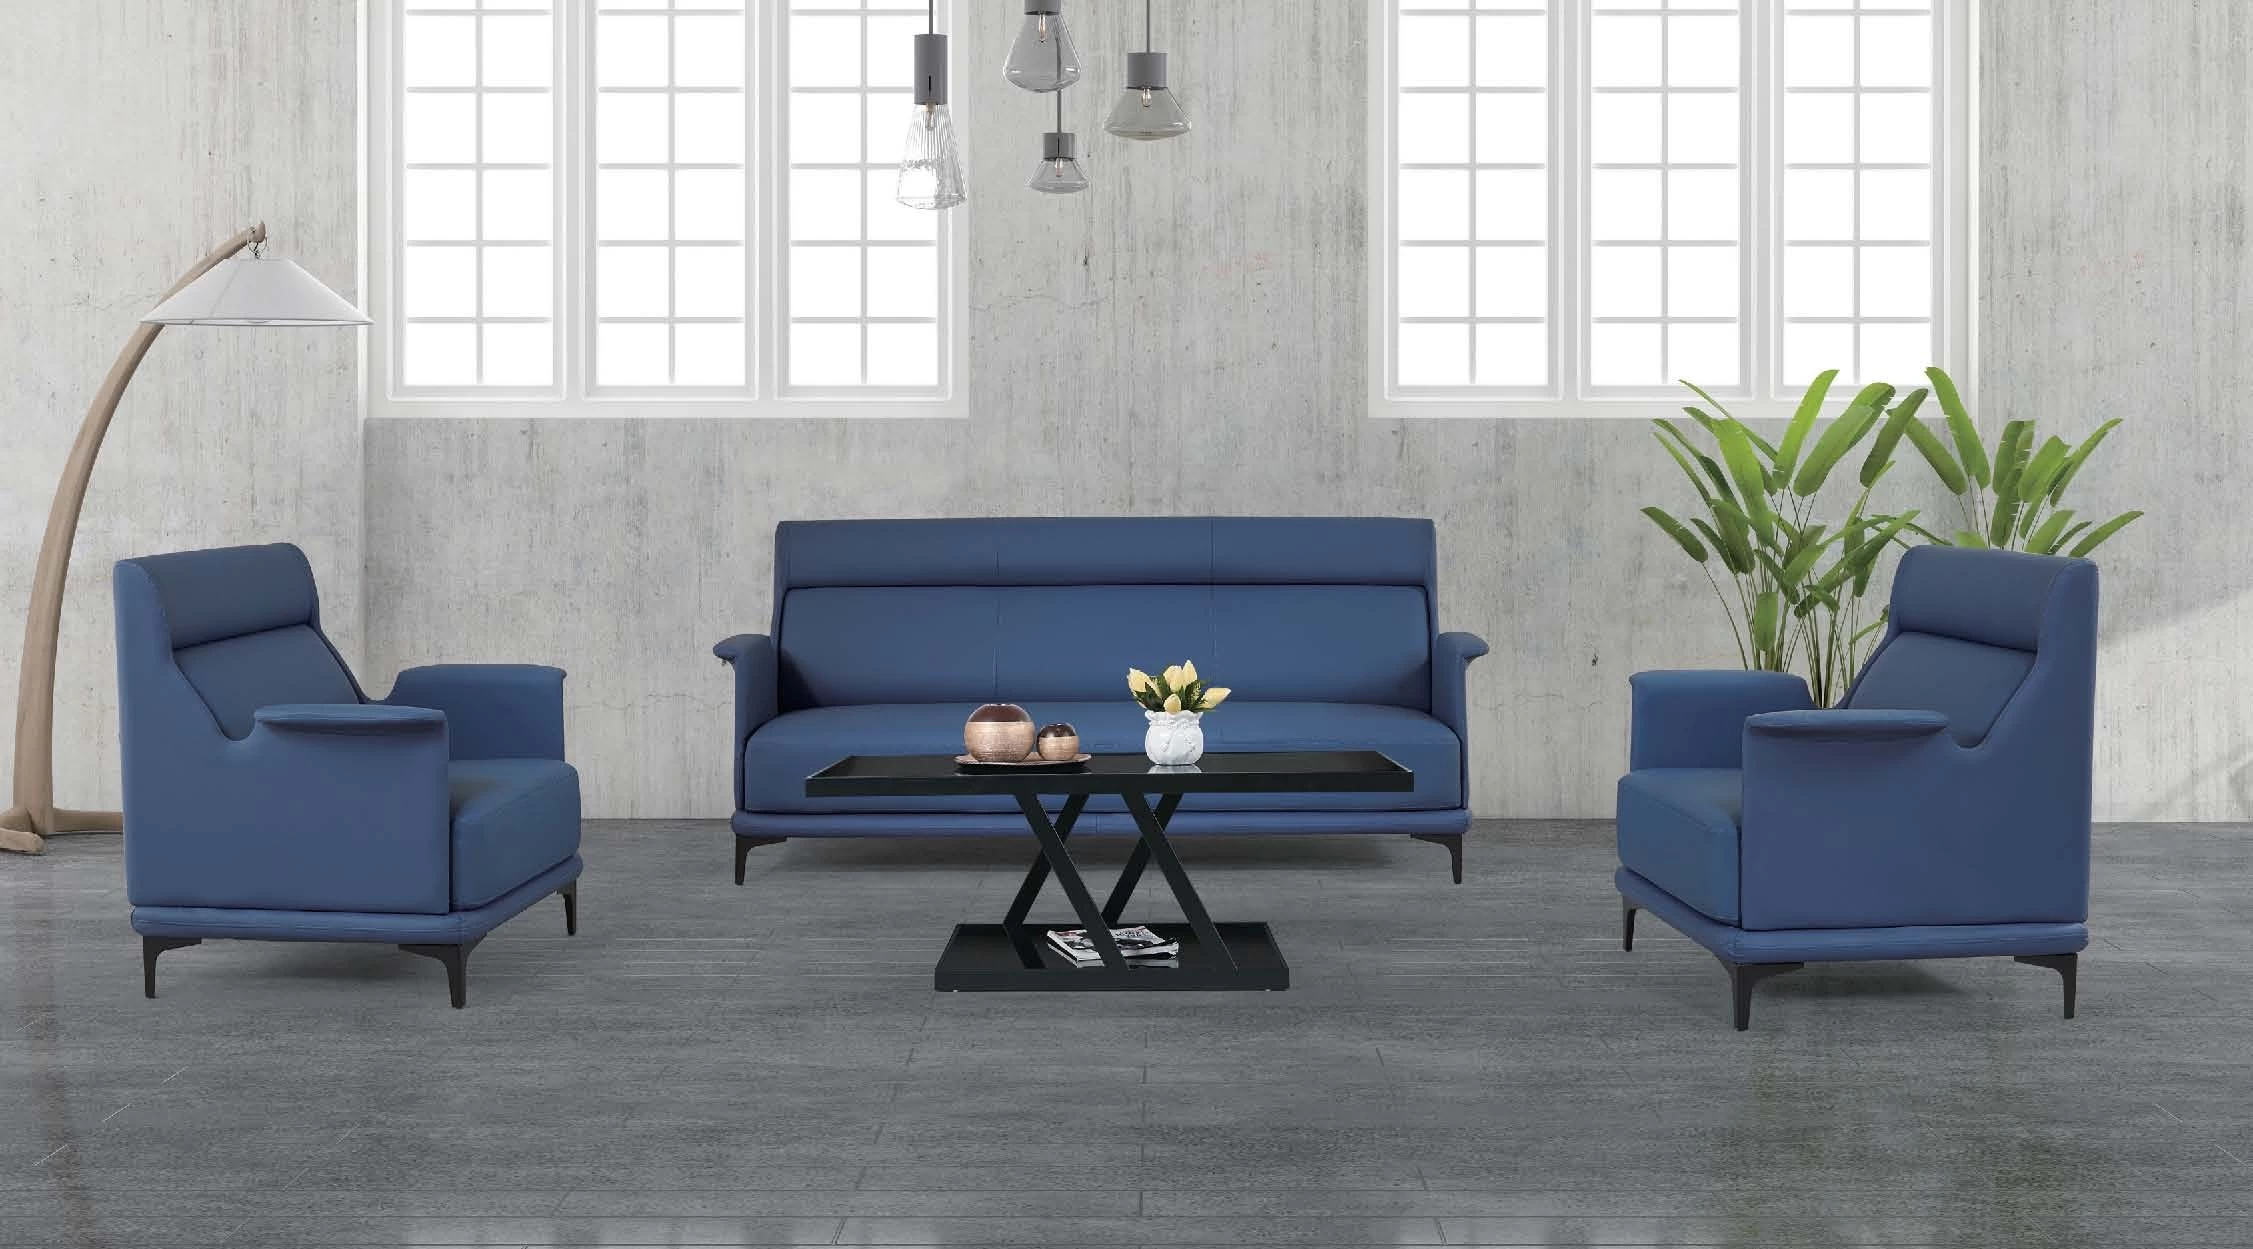 China Newcity S-917-1 High Quality Pu Sofa Sturdy Wooden frame Metal Leg Bold and Retro Elegant Vintage Design Natural Leather Texture and Grain Office Sofa  Supplier Foshan China manufacturer